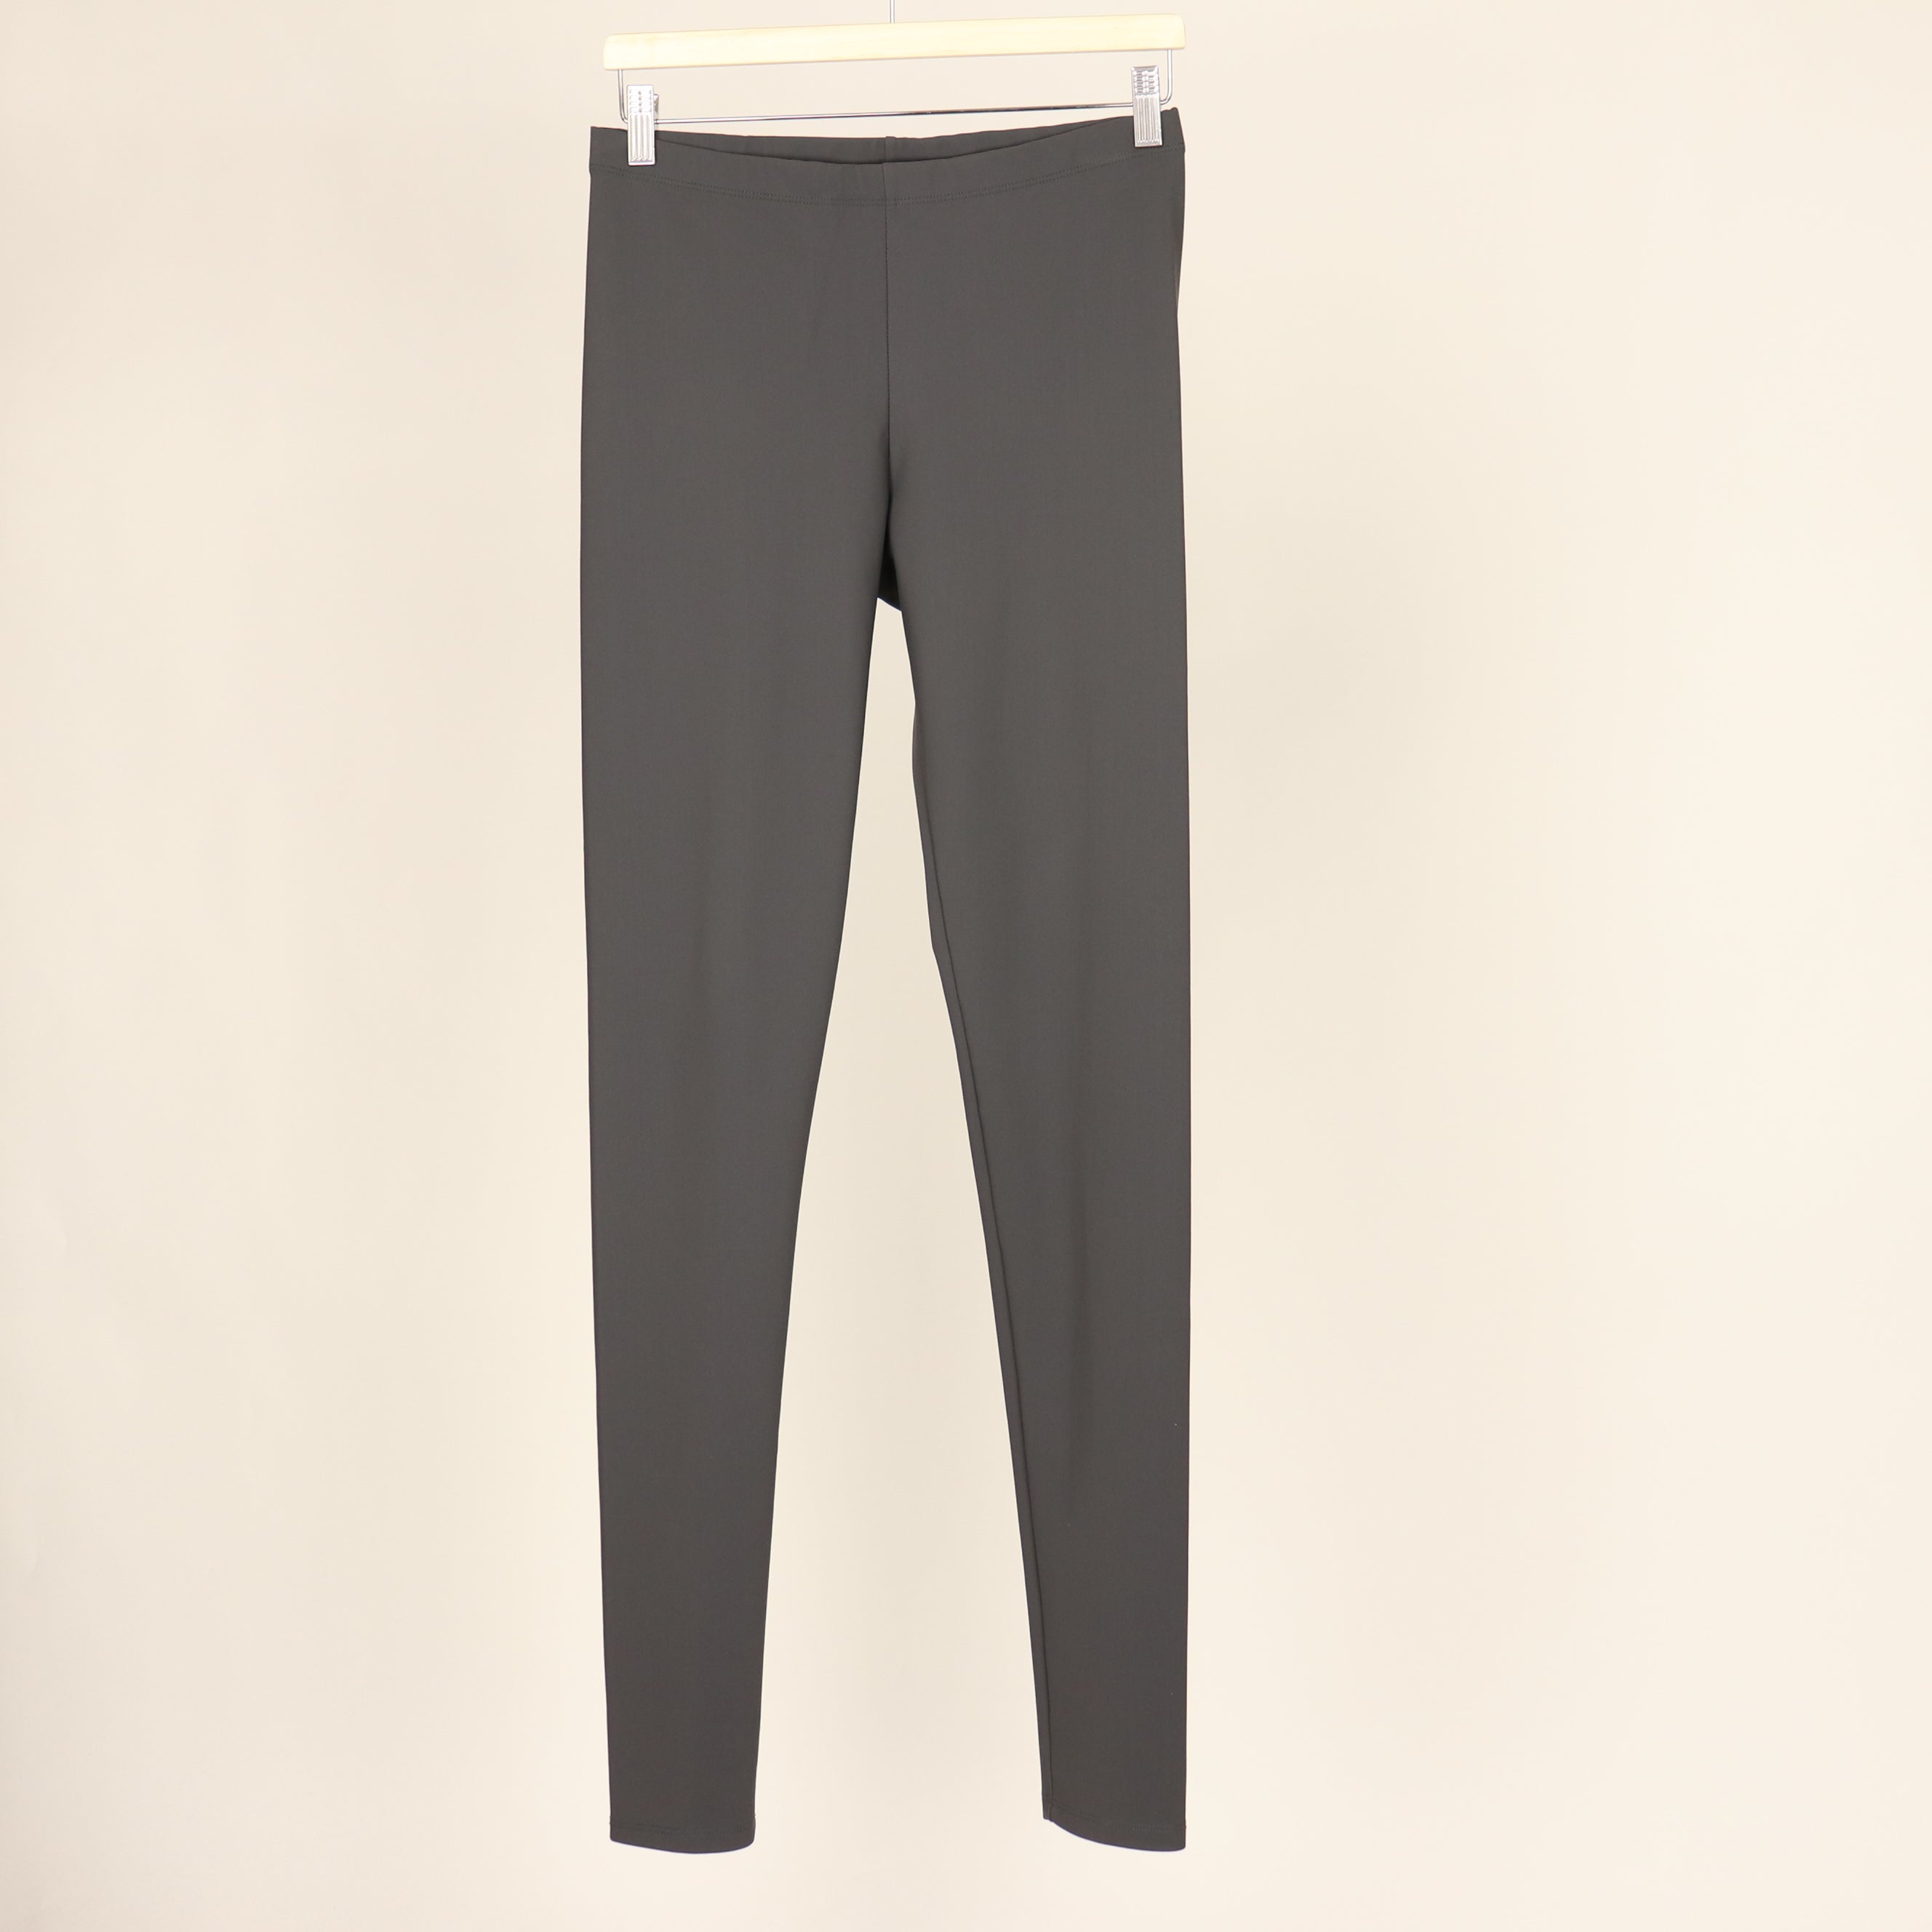 Trousers, Size 12